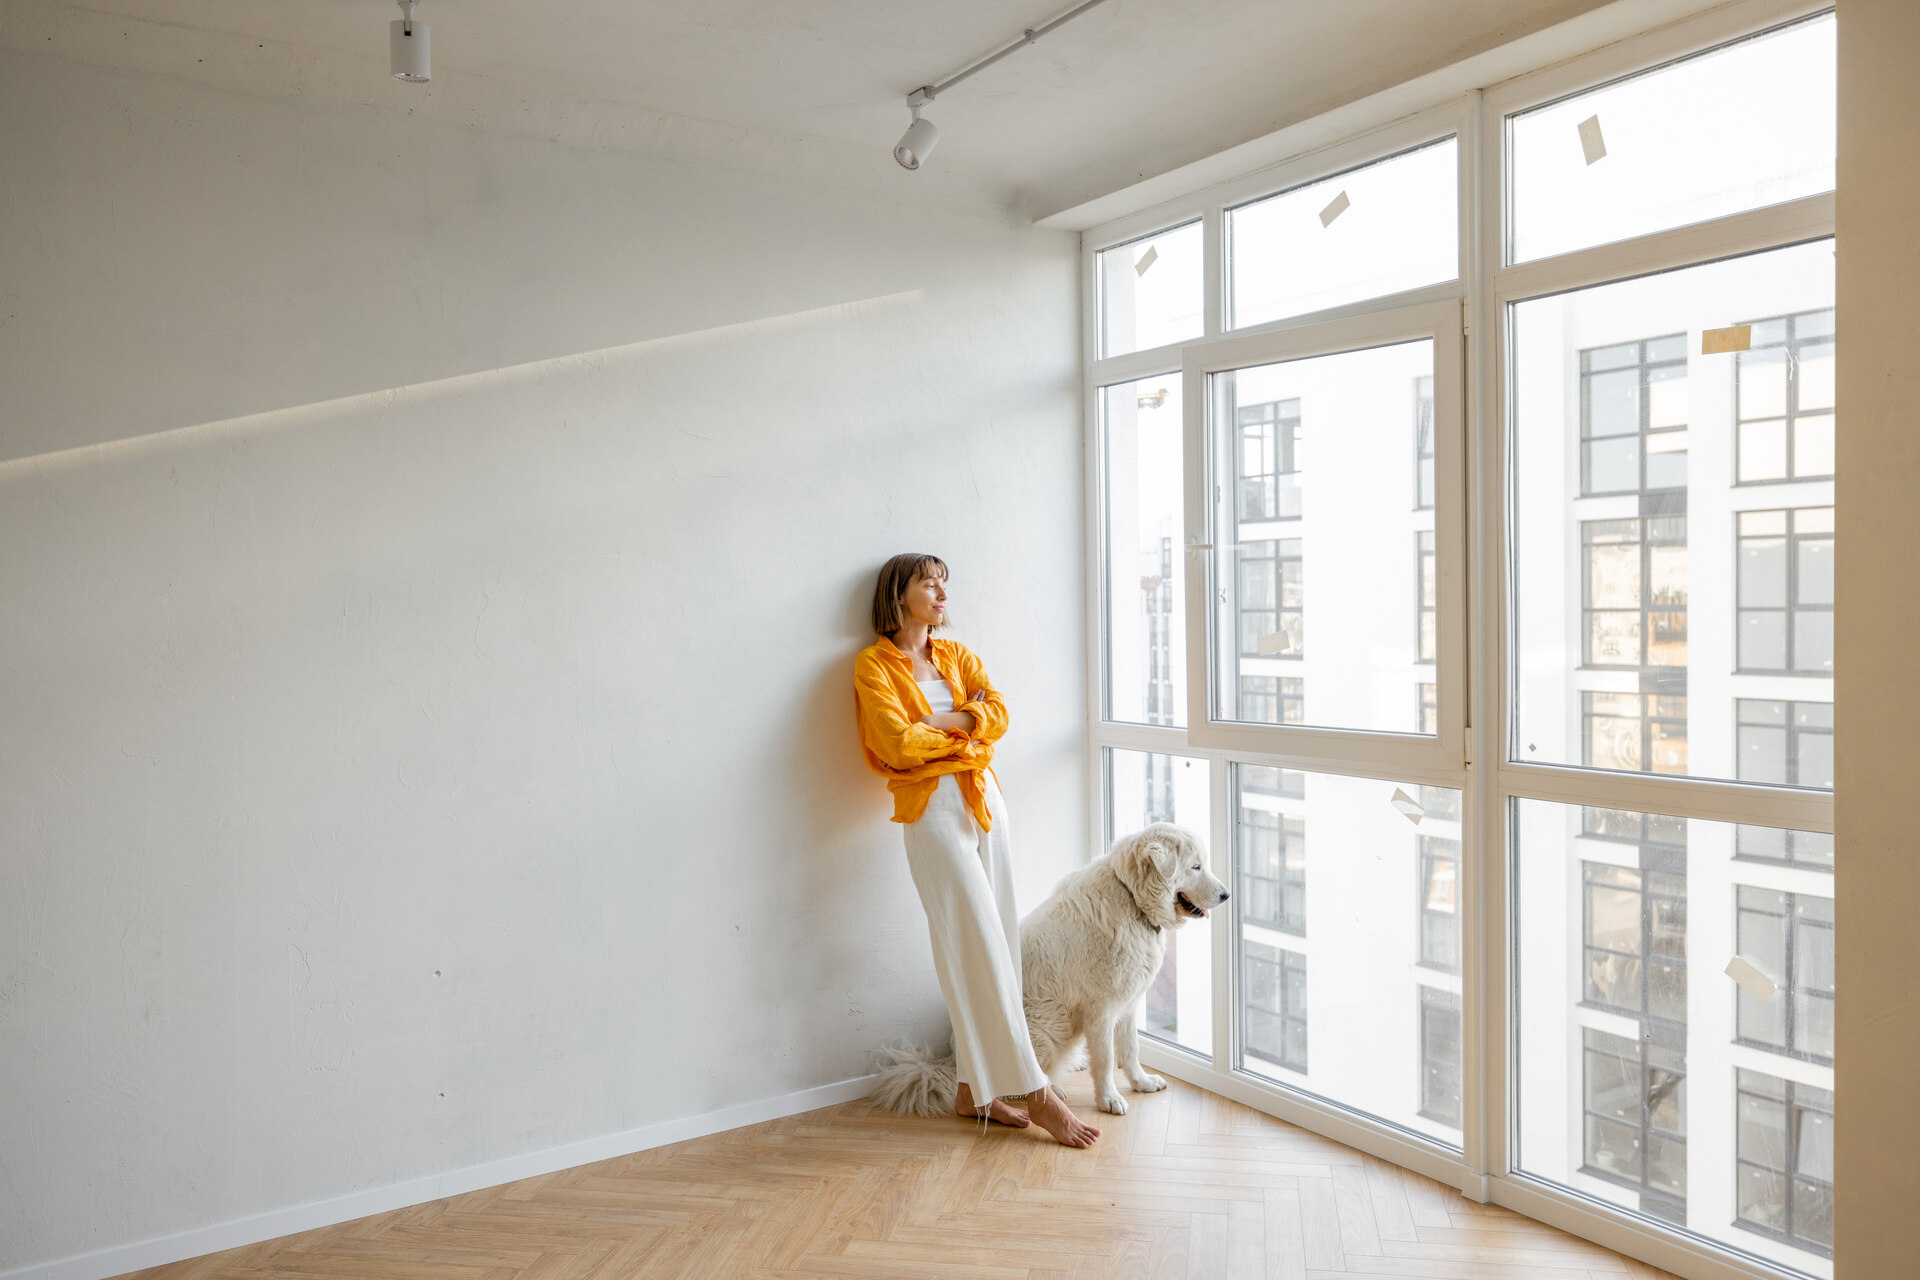 A woman and dog in a new unfurnished apartment